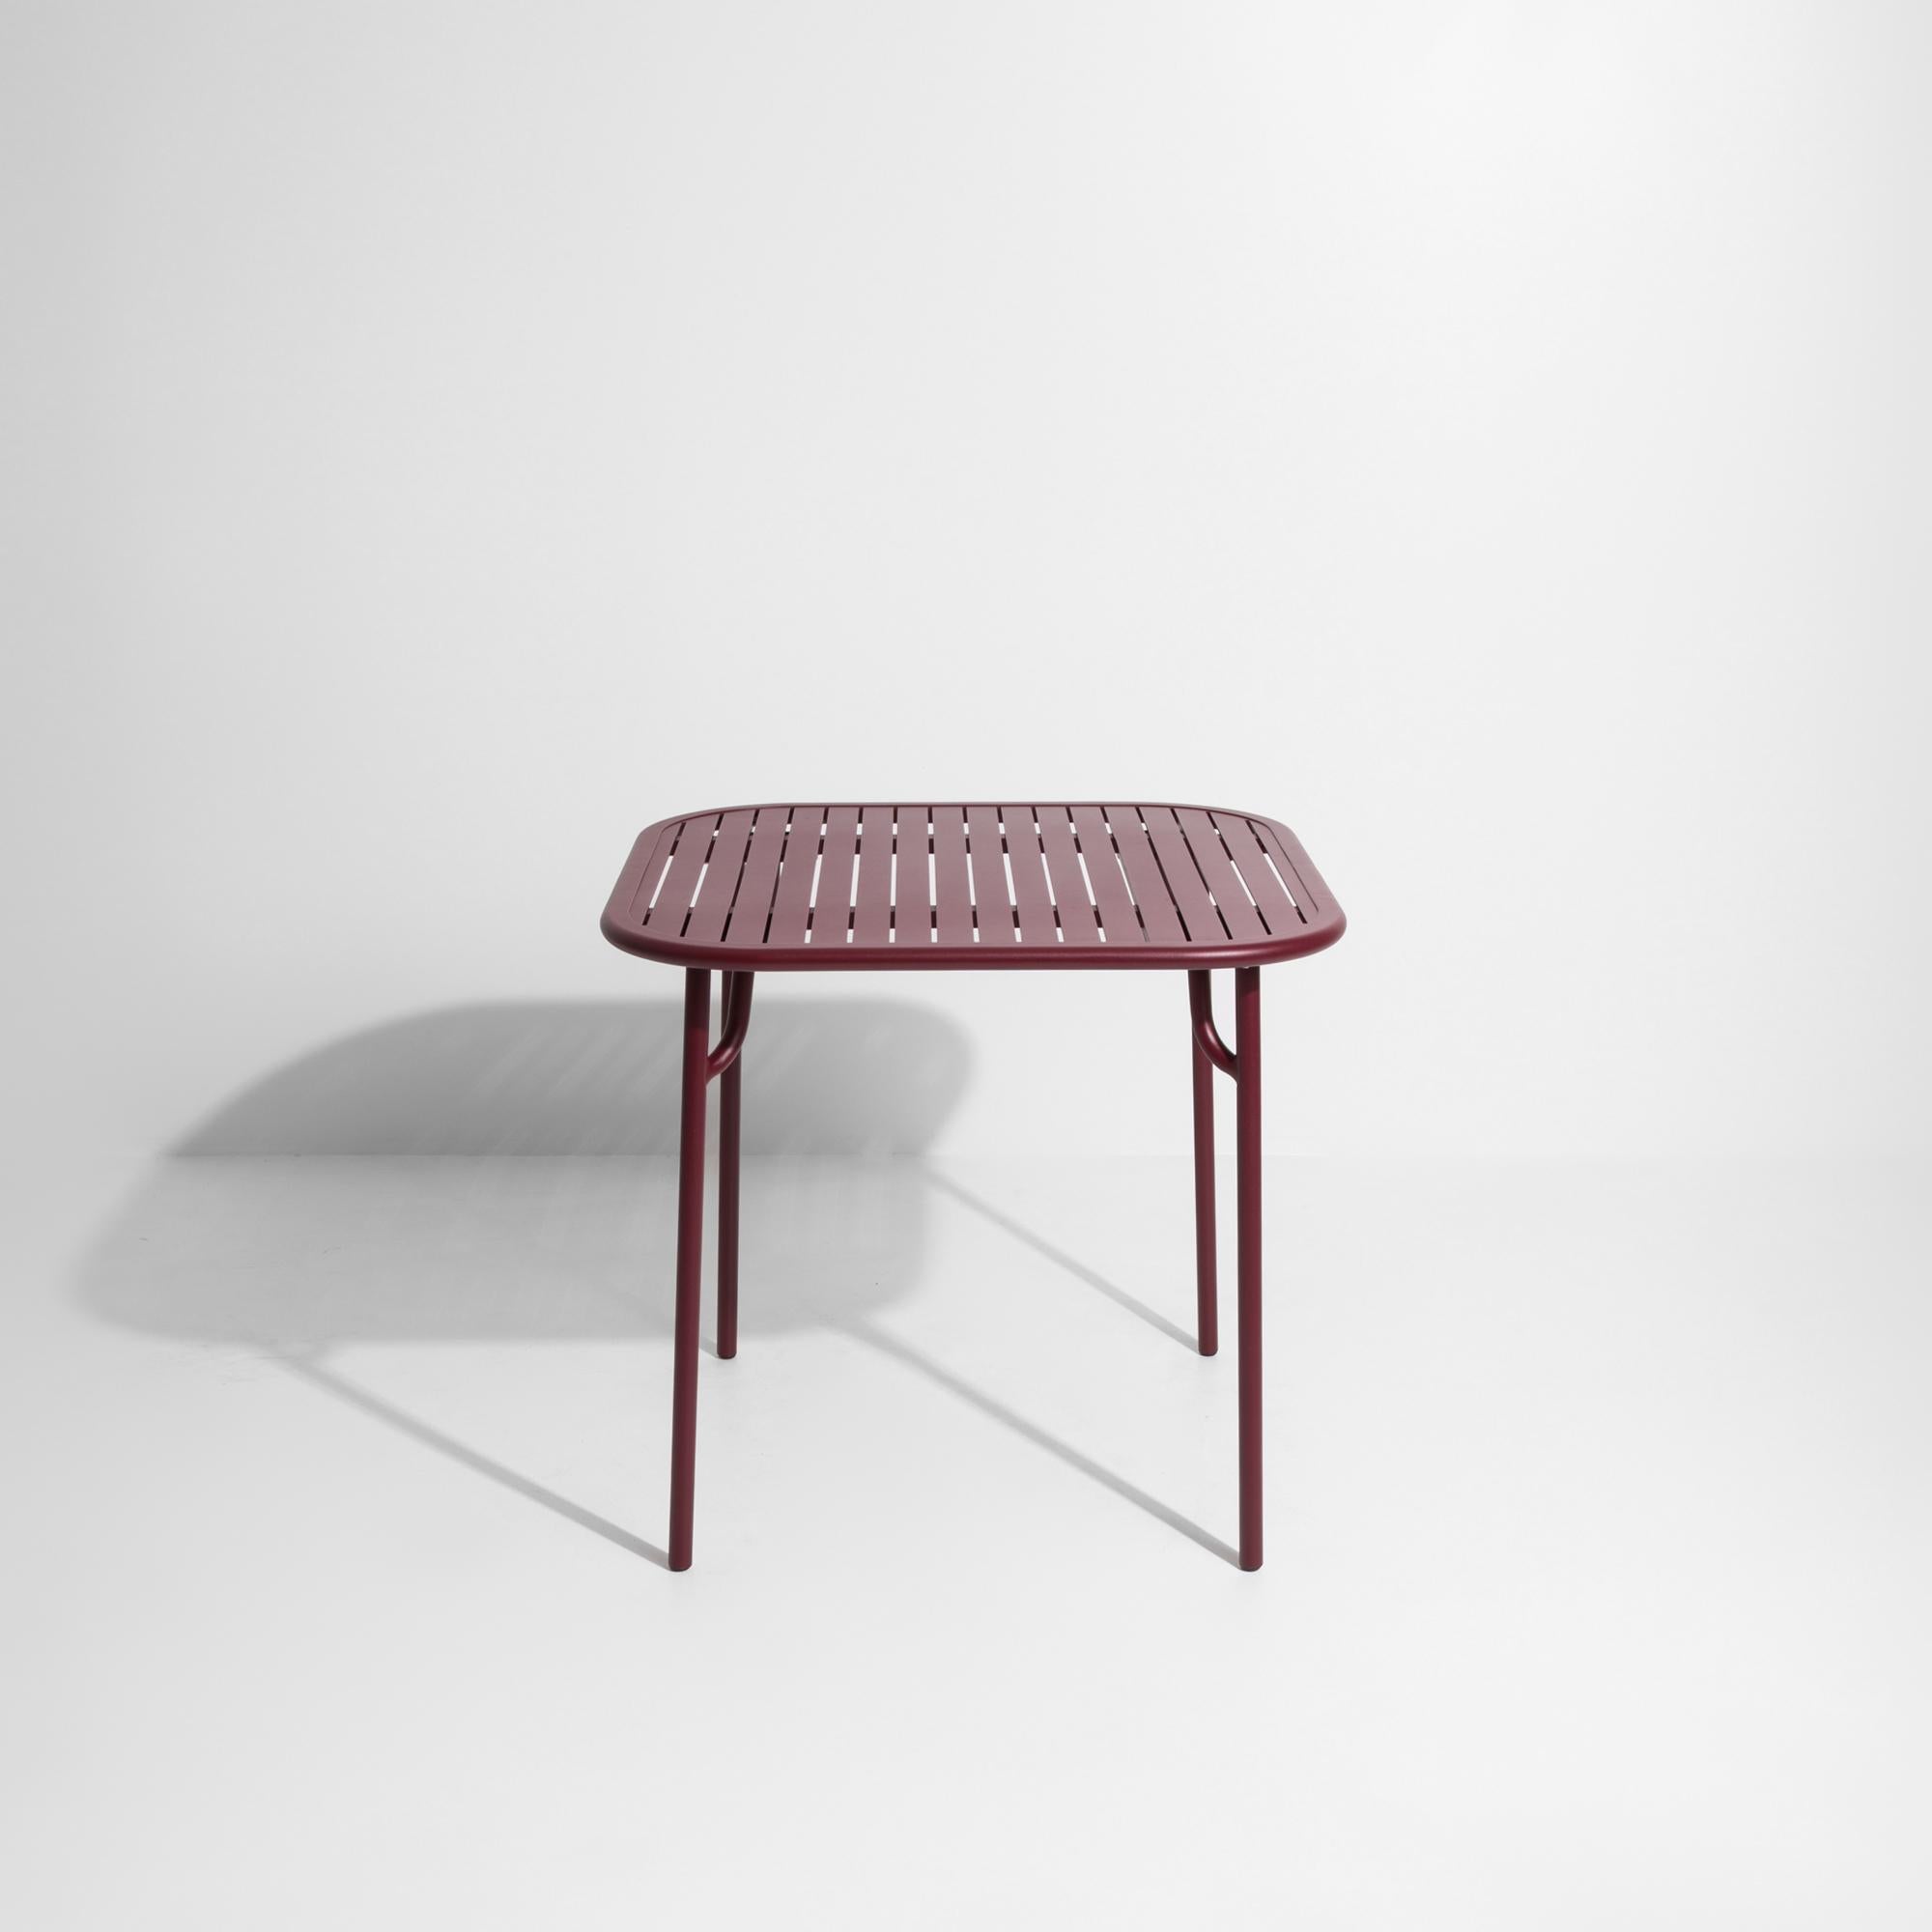 Petite Friture Week-End Square Dining Table in Burgundy Aluminium with Slats In New Condition For Sale In Brooklyn, NY